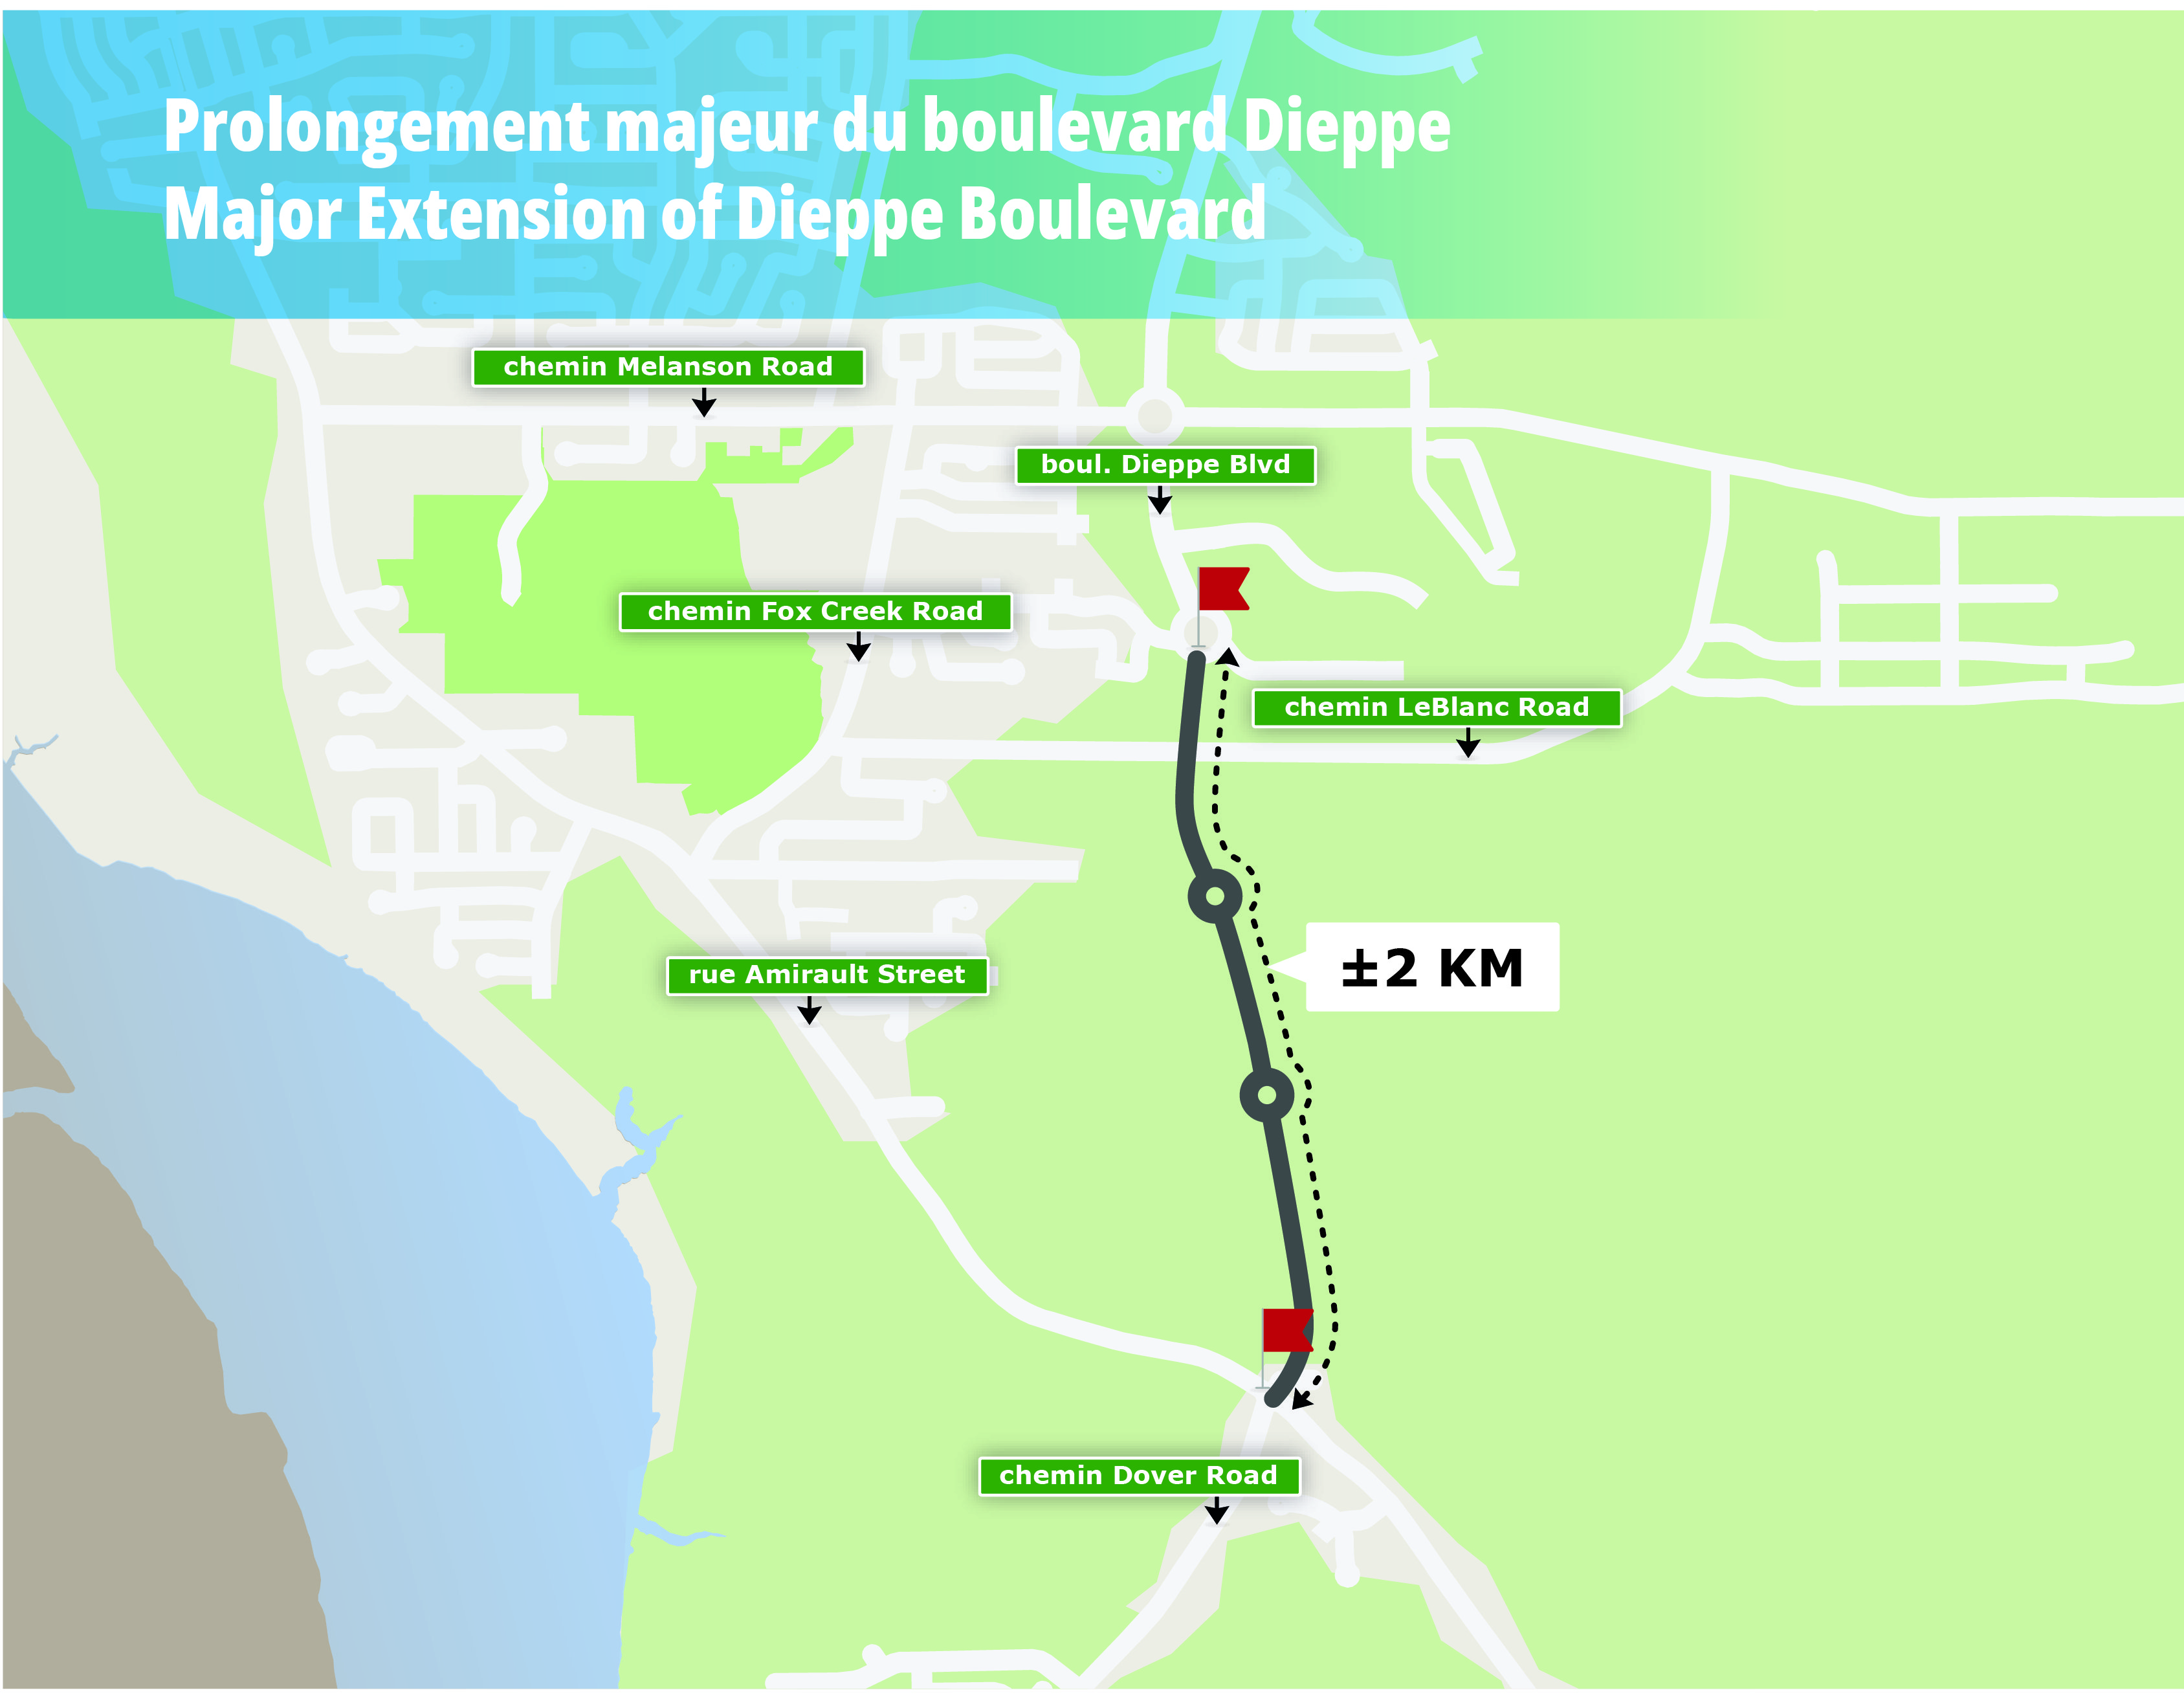 Preliminary design of the extension of Dieppe Boulevard